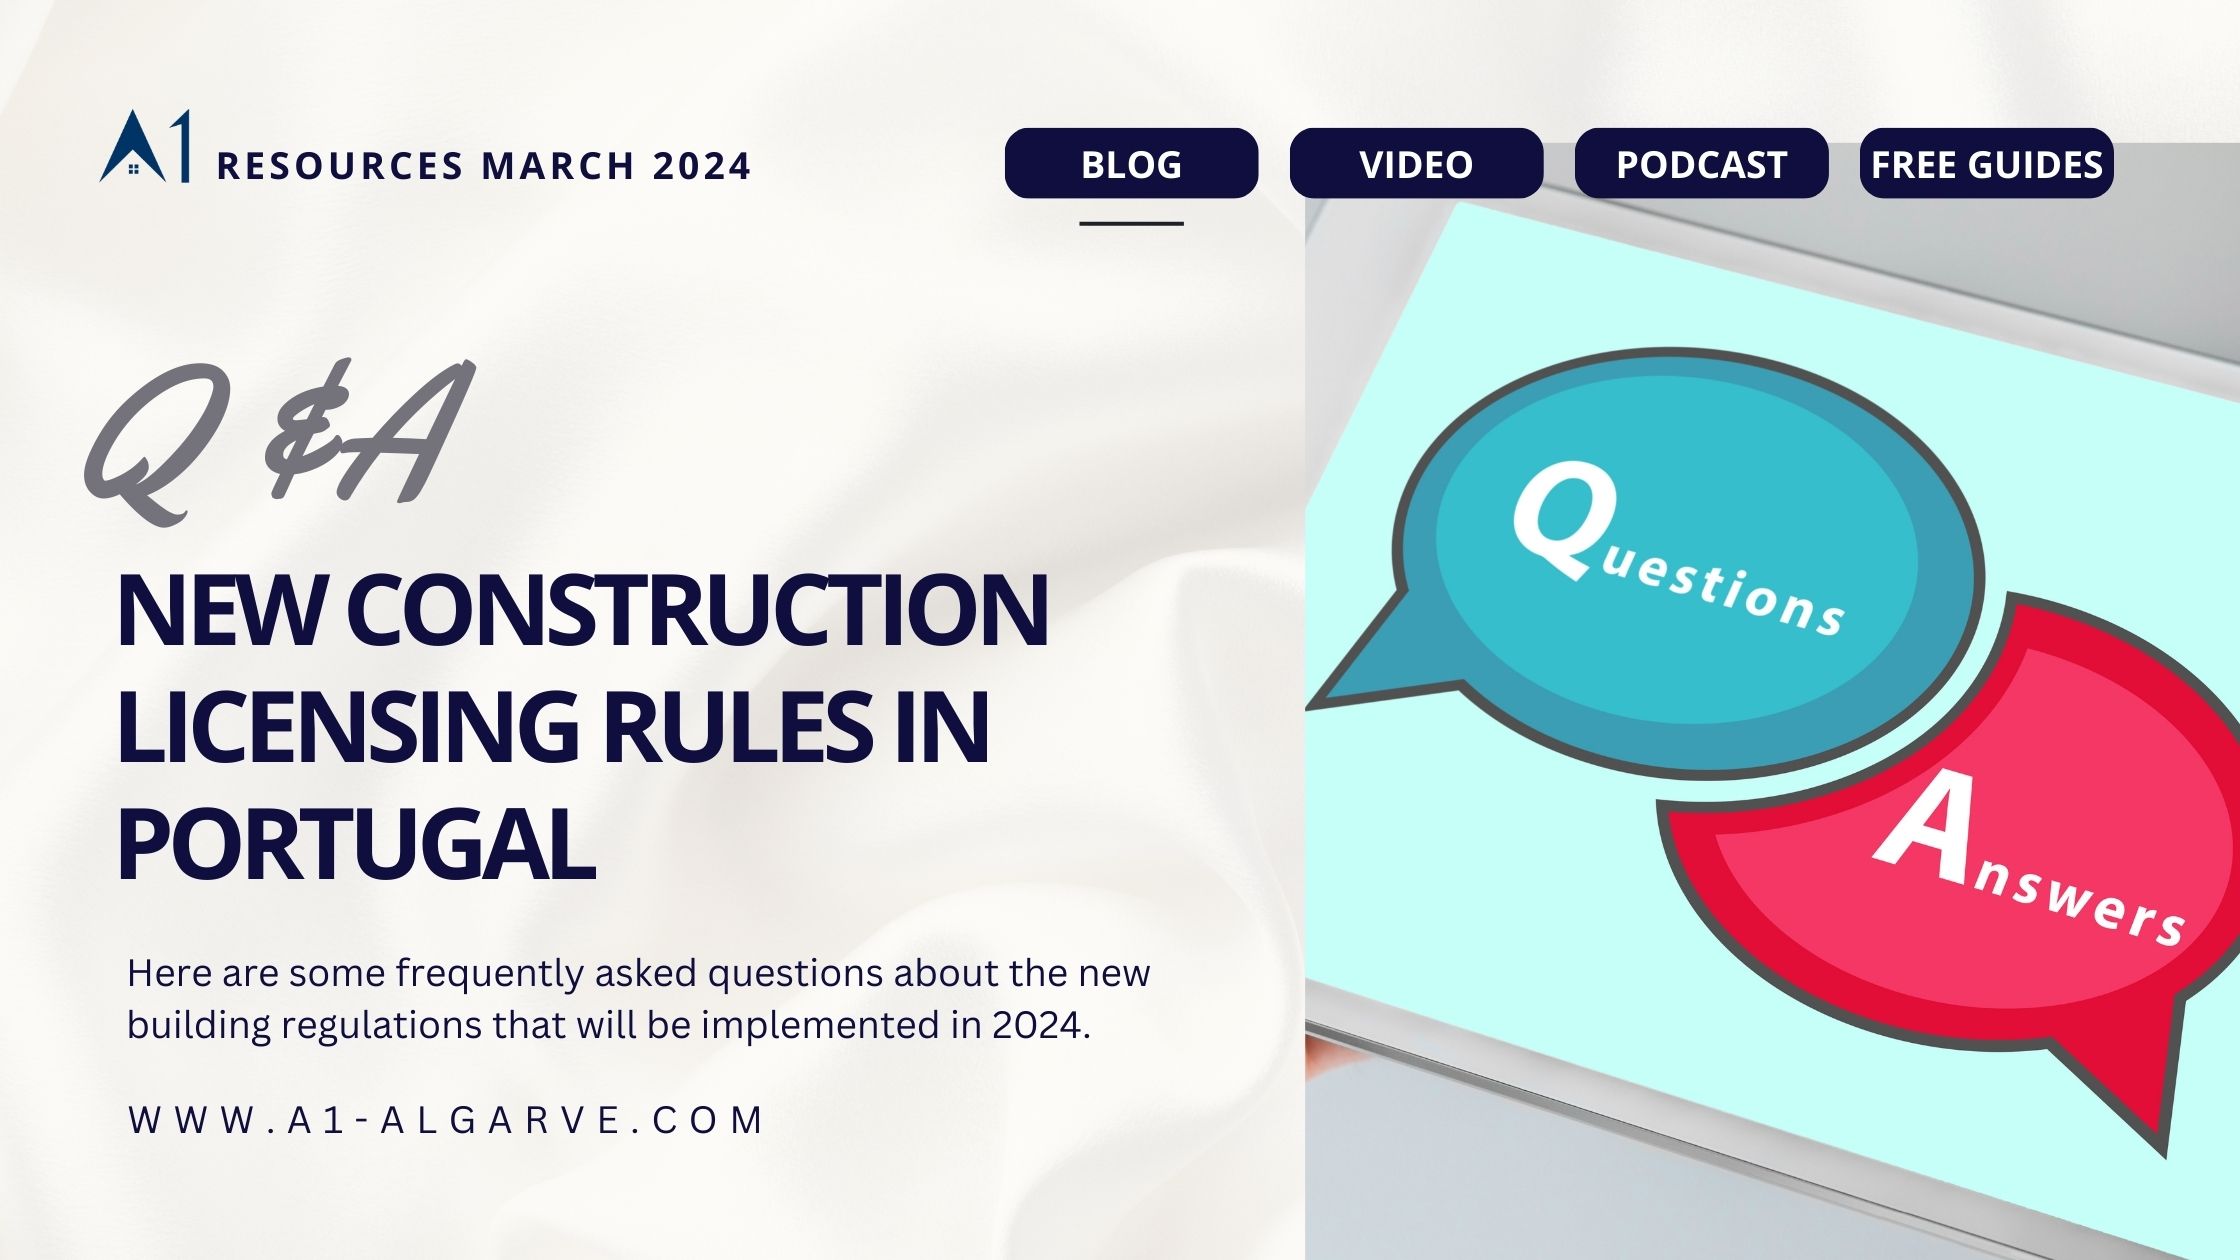 Q&A NEW CONSTRUCTION LICENSING RULES IN PORTUGAL